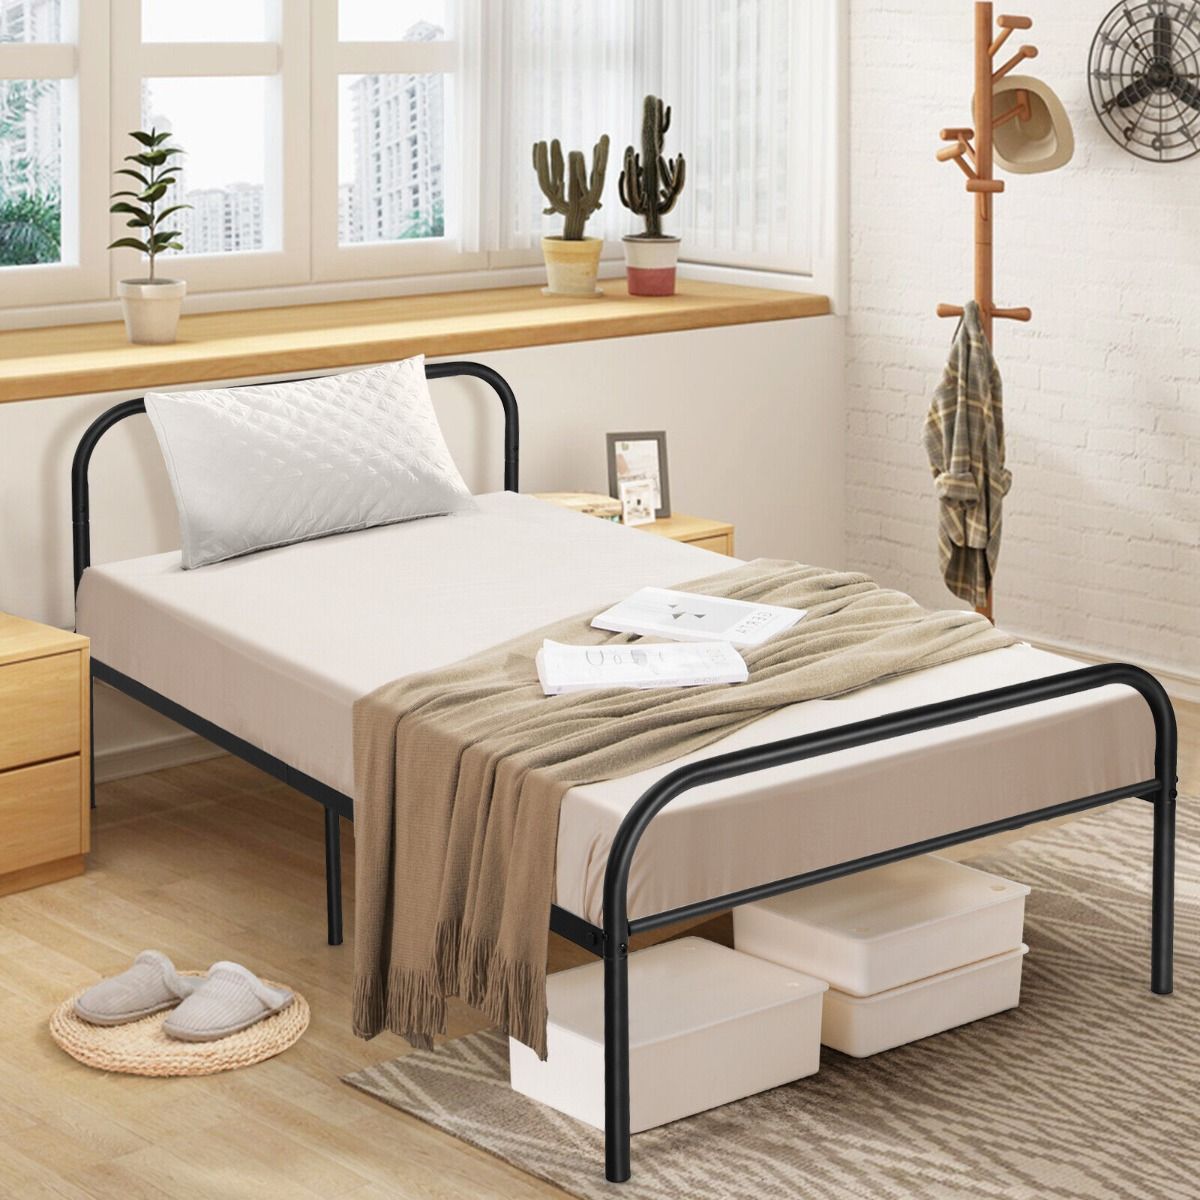 Single Metal Bed Frame with Headboard Footboard and Underbed Storage Space